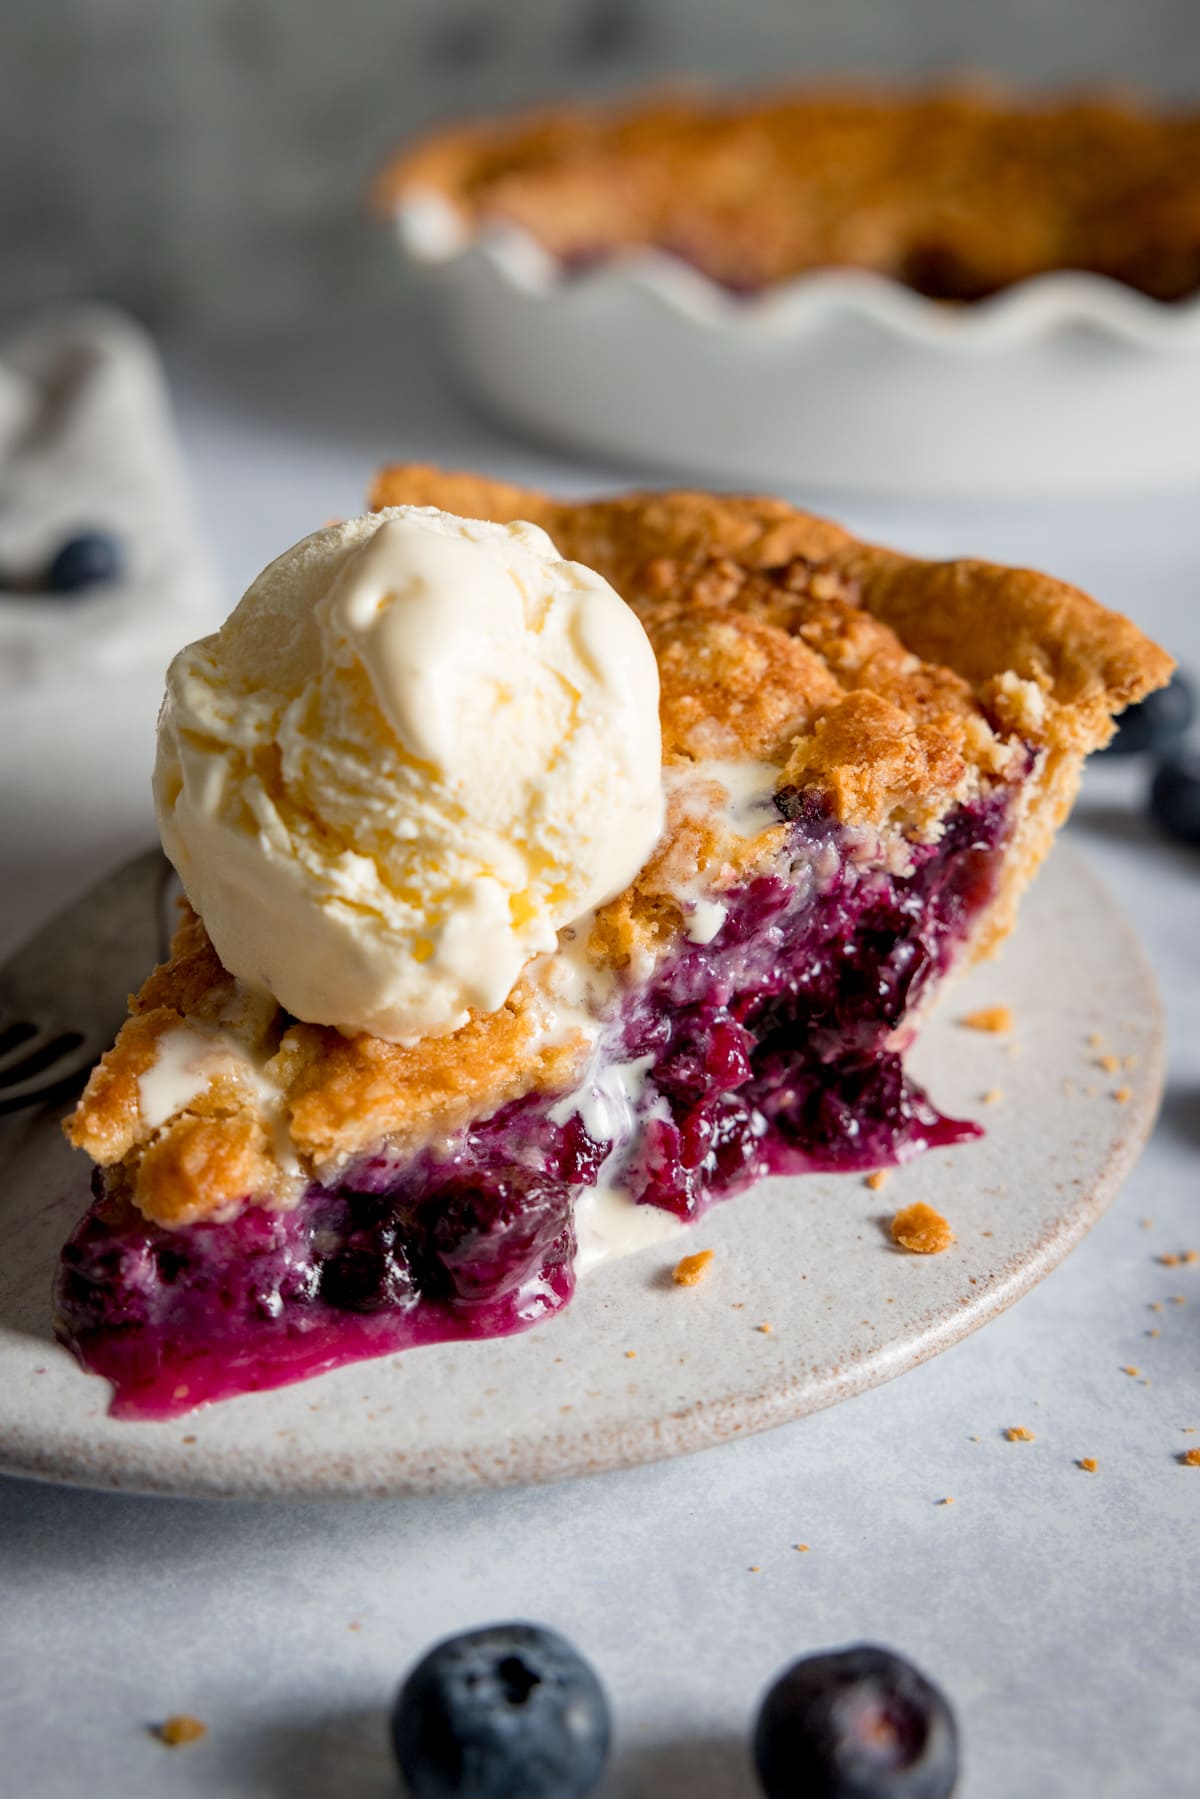 Close up of a slice blueberry crumble pie on a white plate, topped with a scoop of vanilla ice cream.
The plate is on a white background.
There are fresh blueberries scattered around the plate.
The rest of the pie is in the background in a white pie dish.